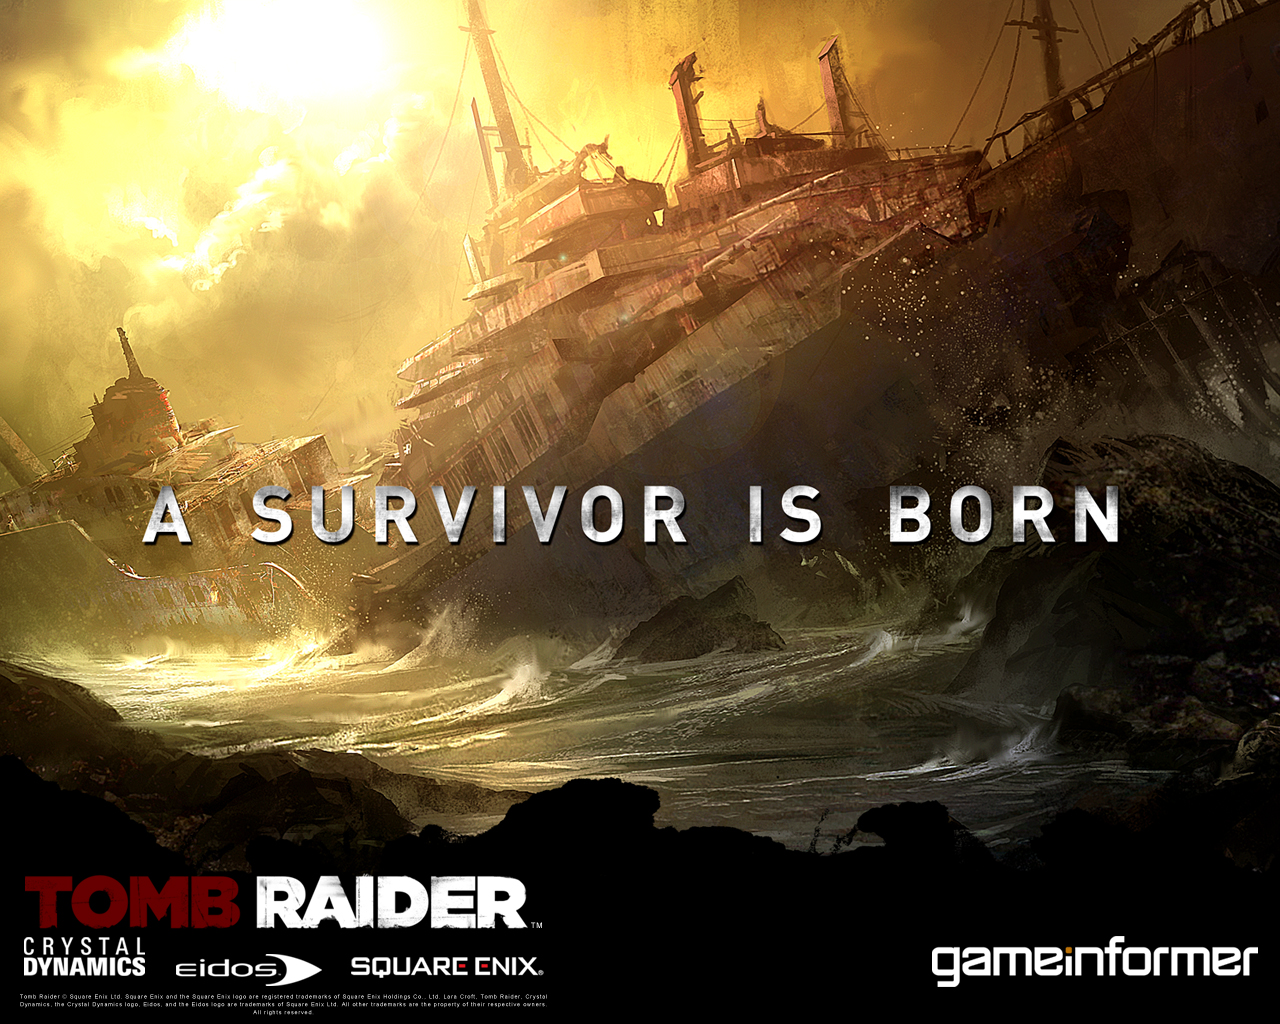 Official Tomb Raider Wallpaper Features Gameinformer